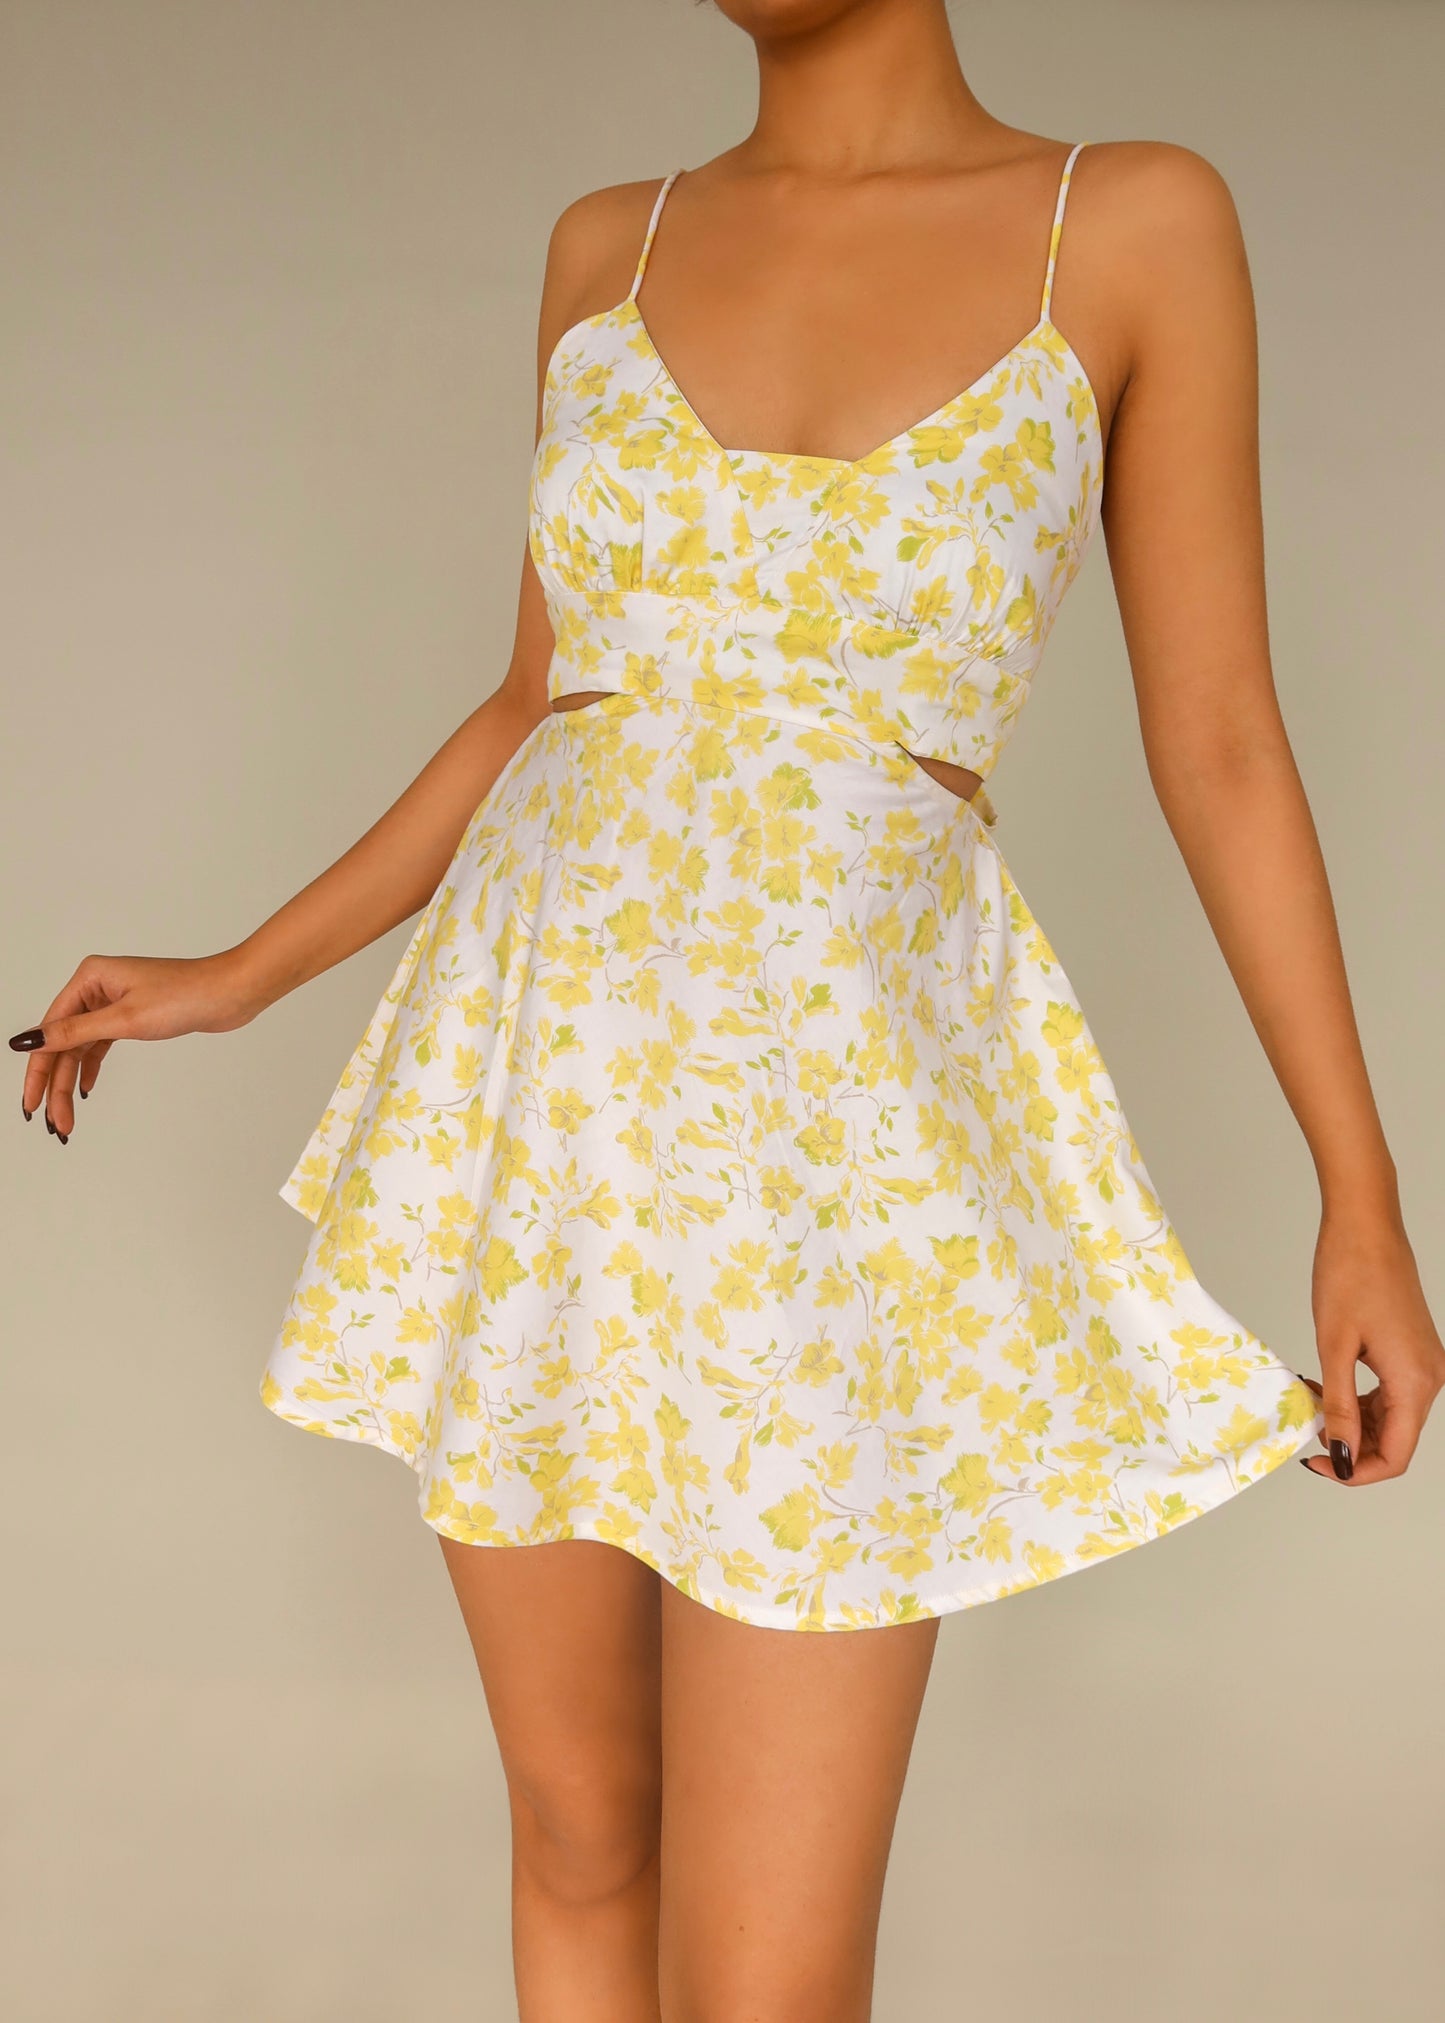 Butterfly Floral Dress